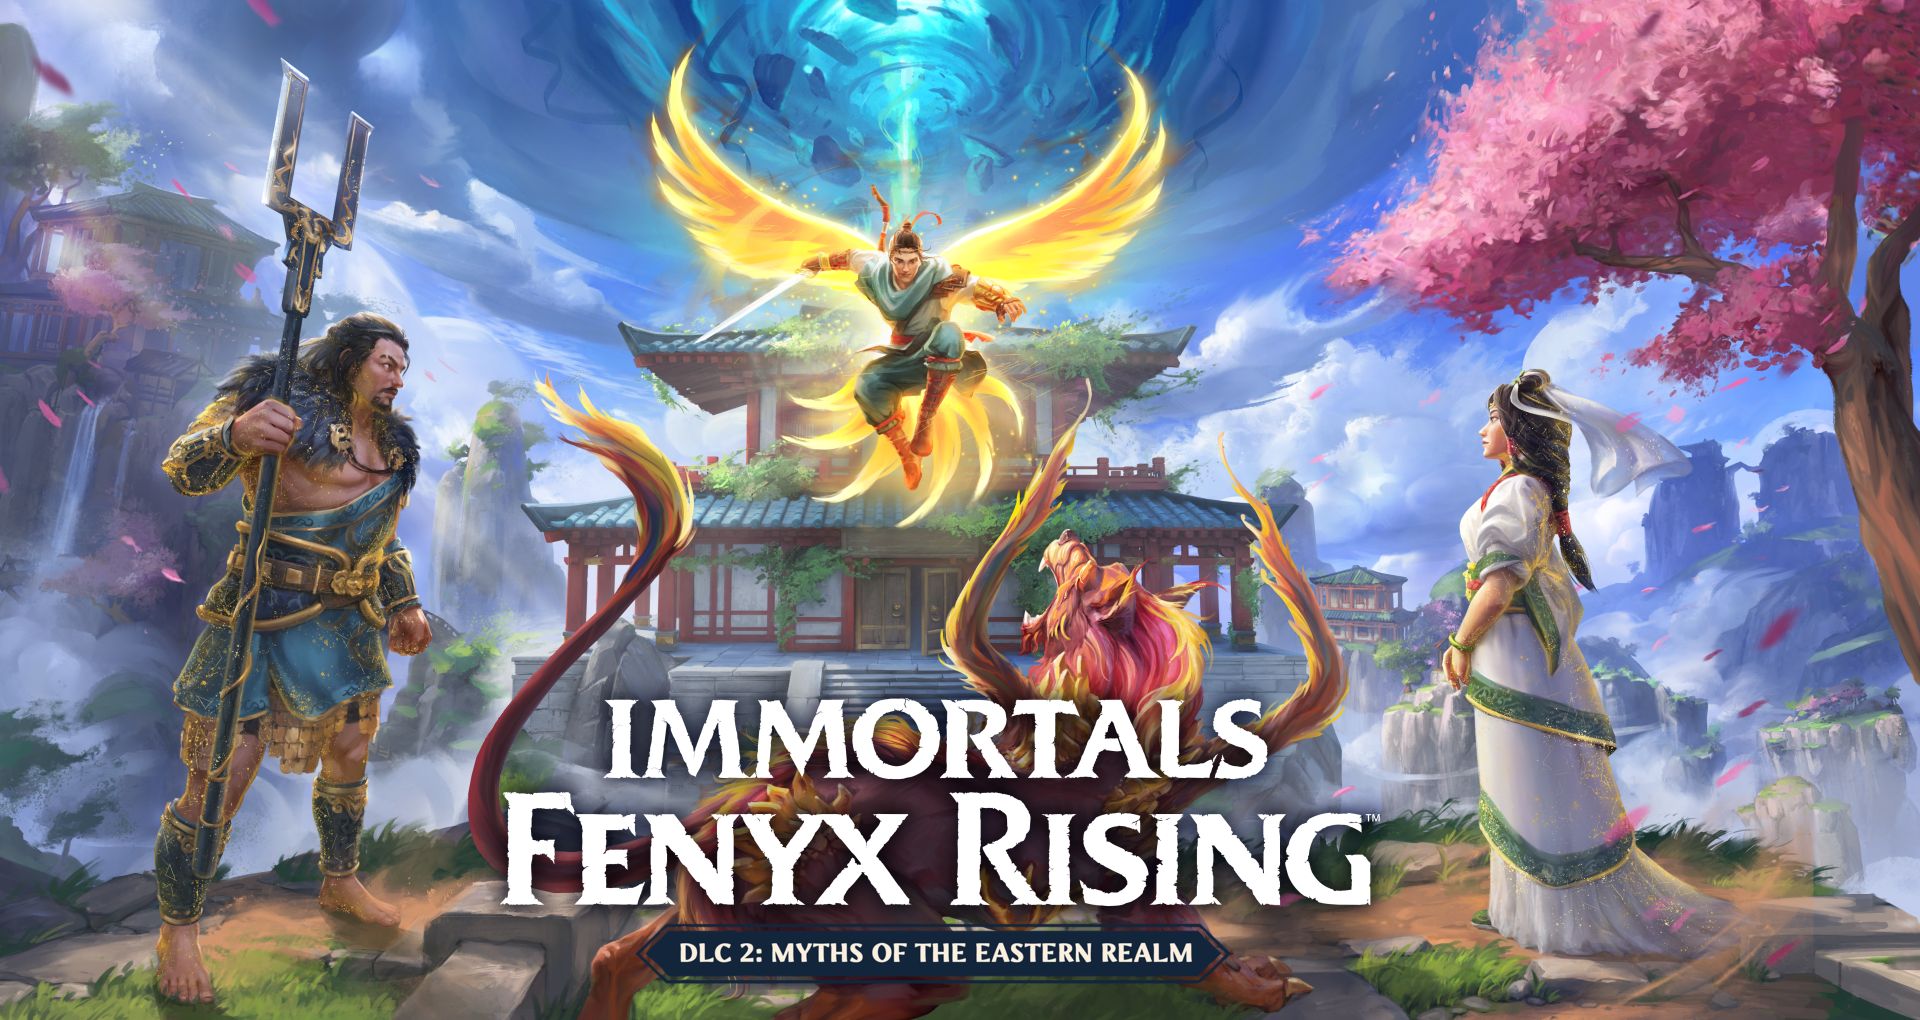 Immortals Fenyx Rising - Myths of the Eastern Realm